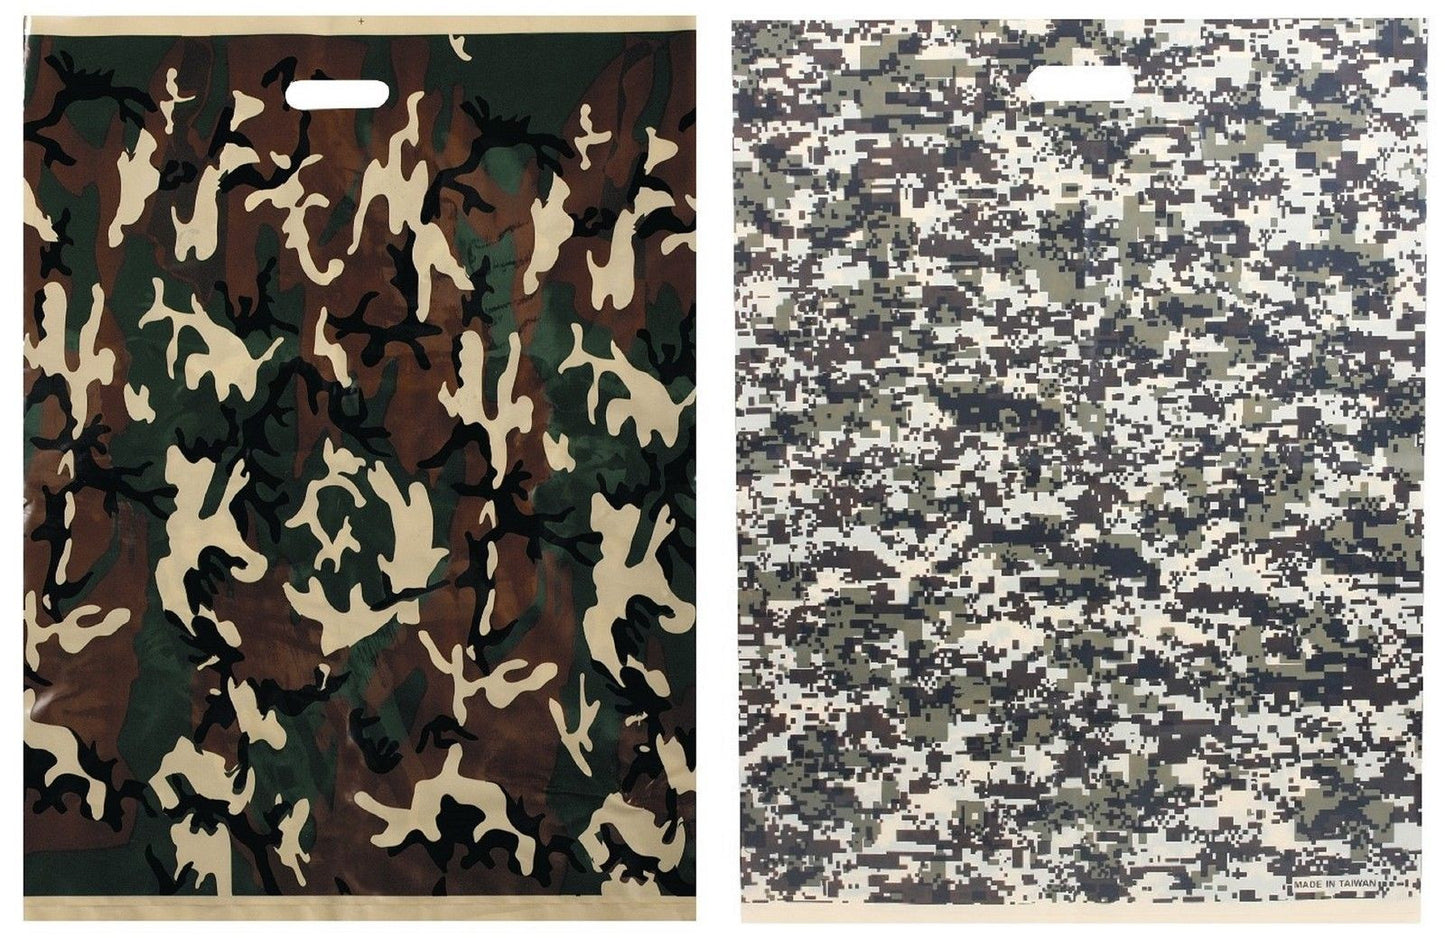 Plastic Camouflage Deluxe Carry Party Bags - Lot of 50 ACU or Woodland Camo Bags